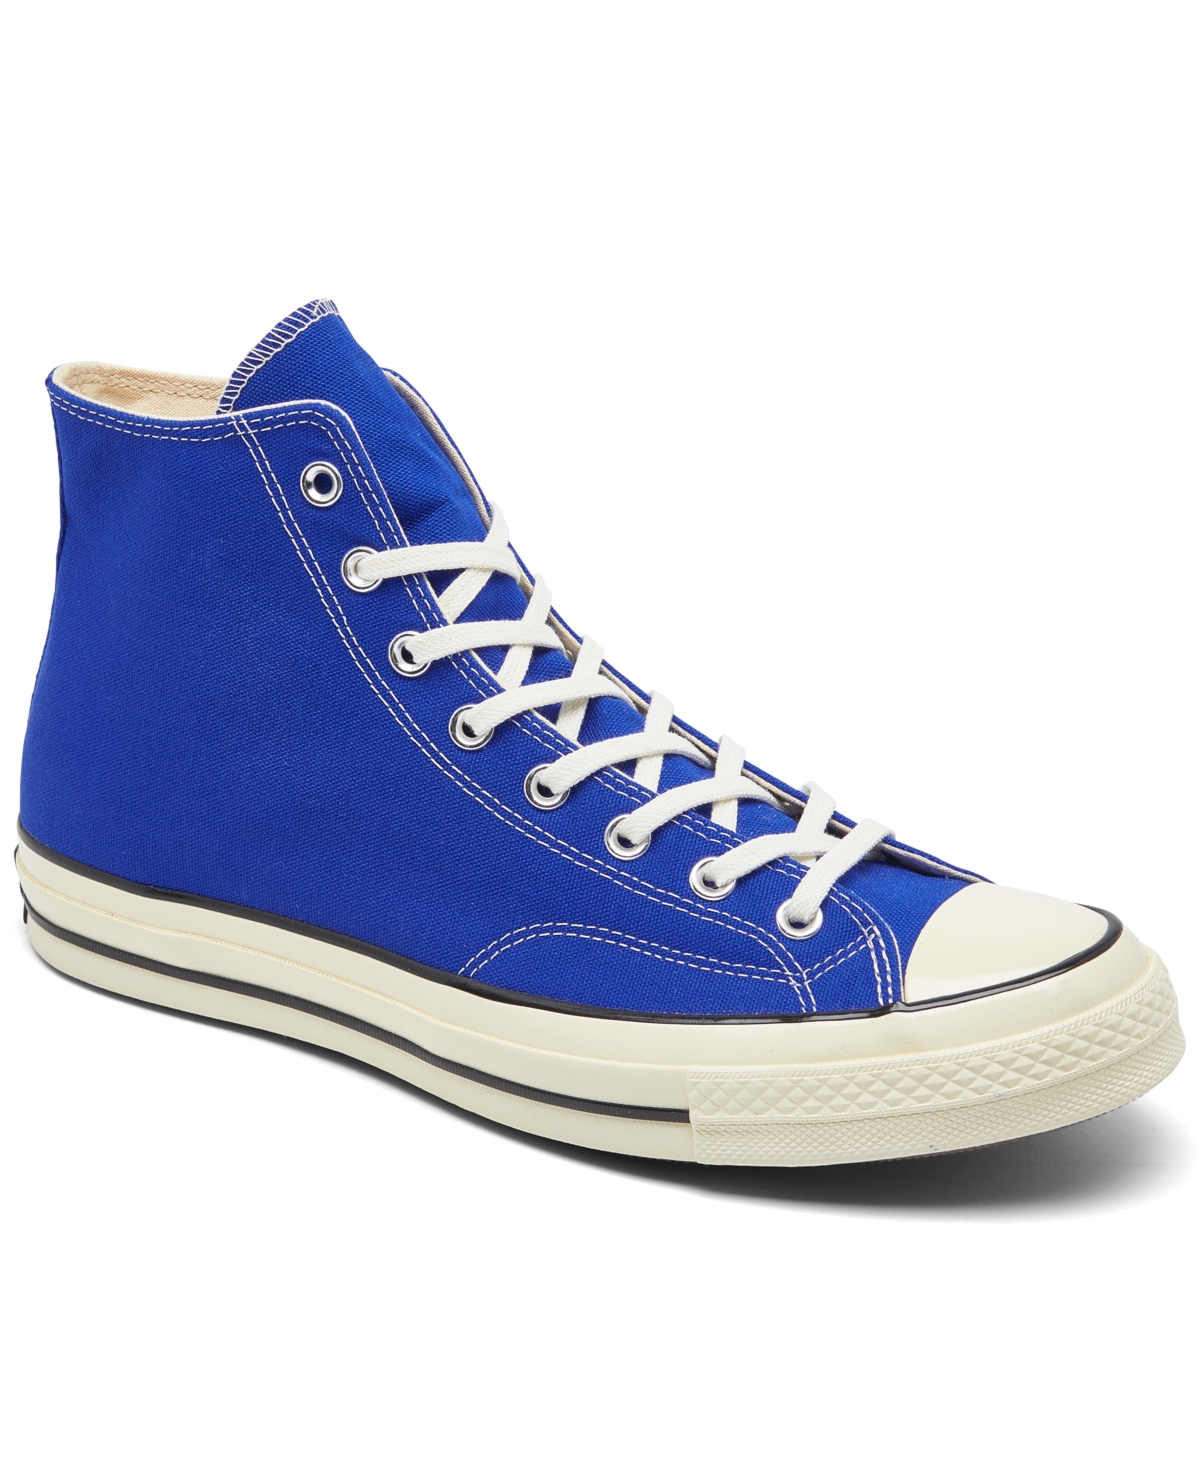 Men's Chuck 70 Vintage-Like Canvas High Top Casual Sneakers from Finish Line - Nice Blue, Black